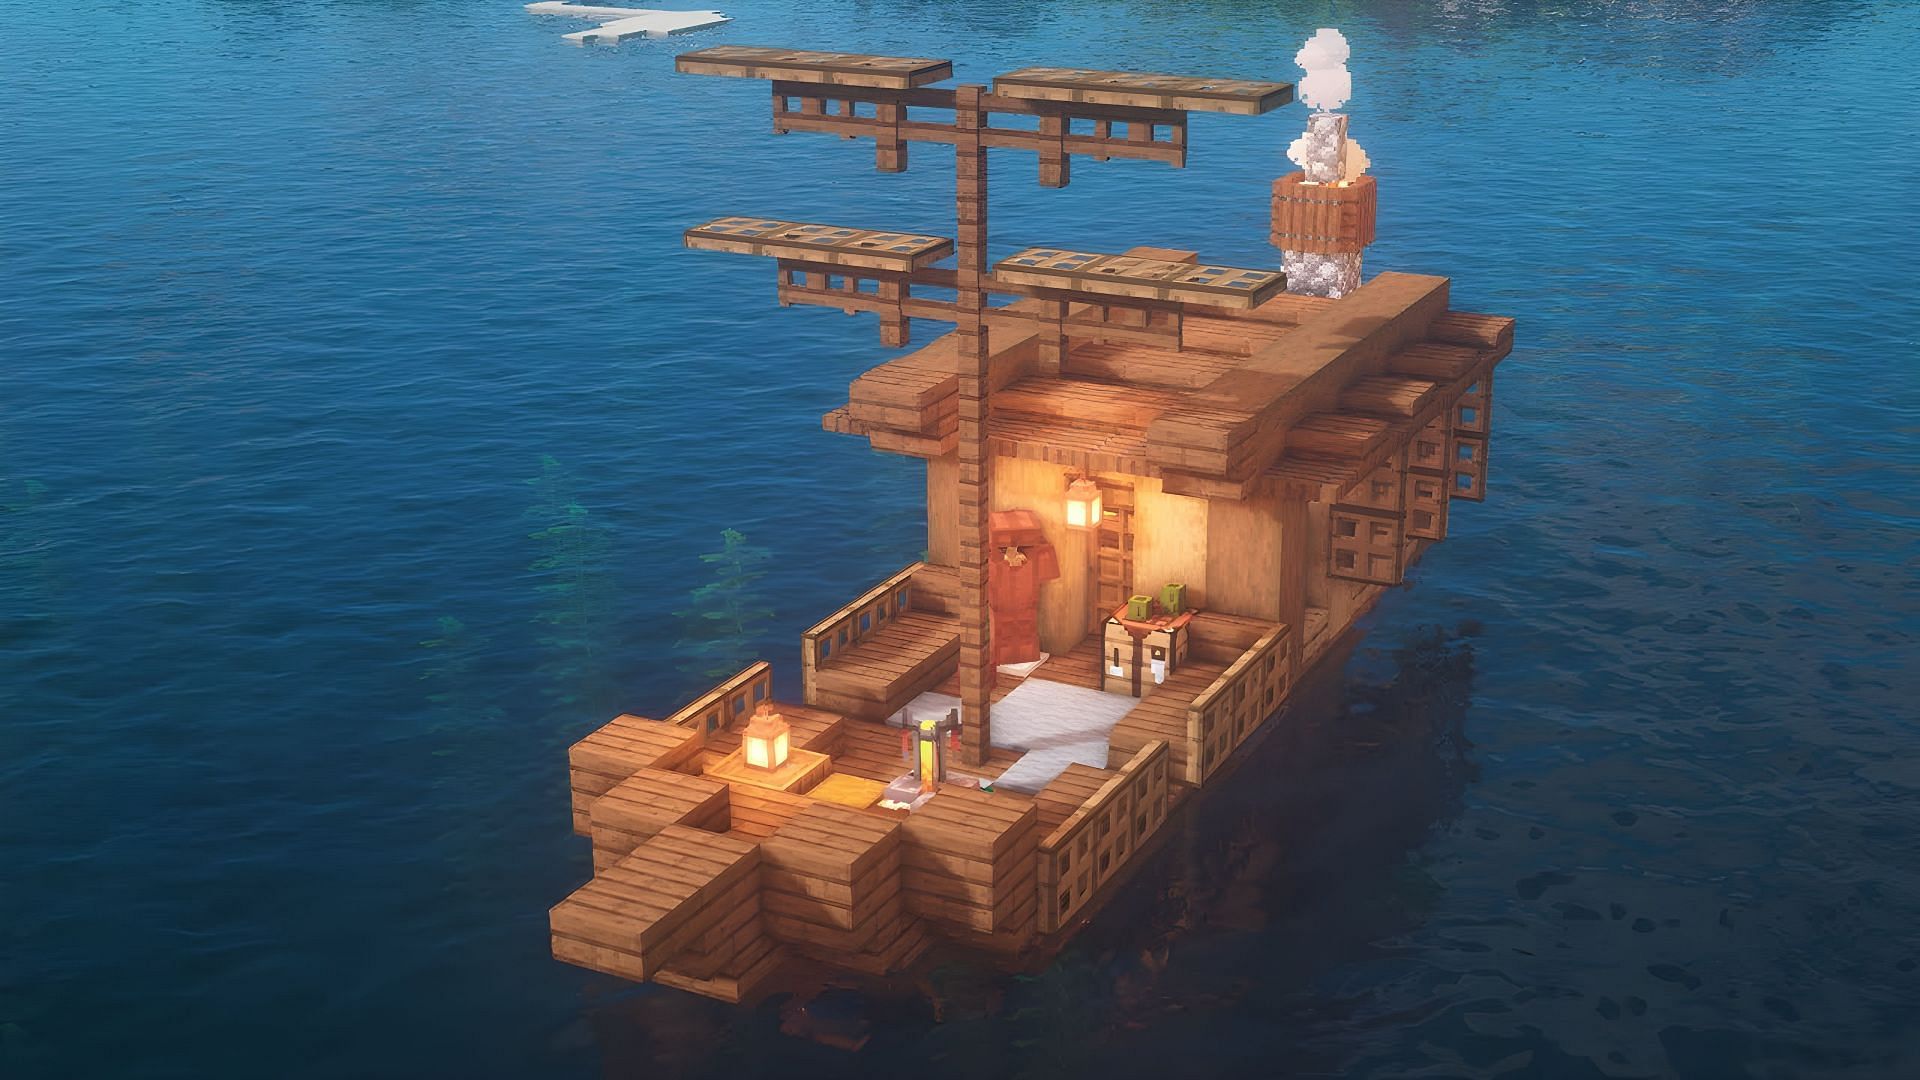 Minecraft boat builds are spectacular (Image via Youtube/Nexy)